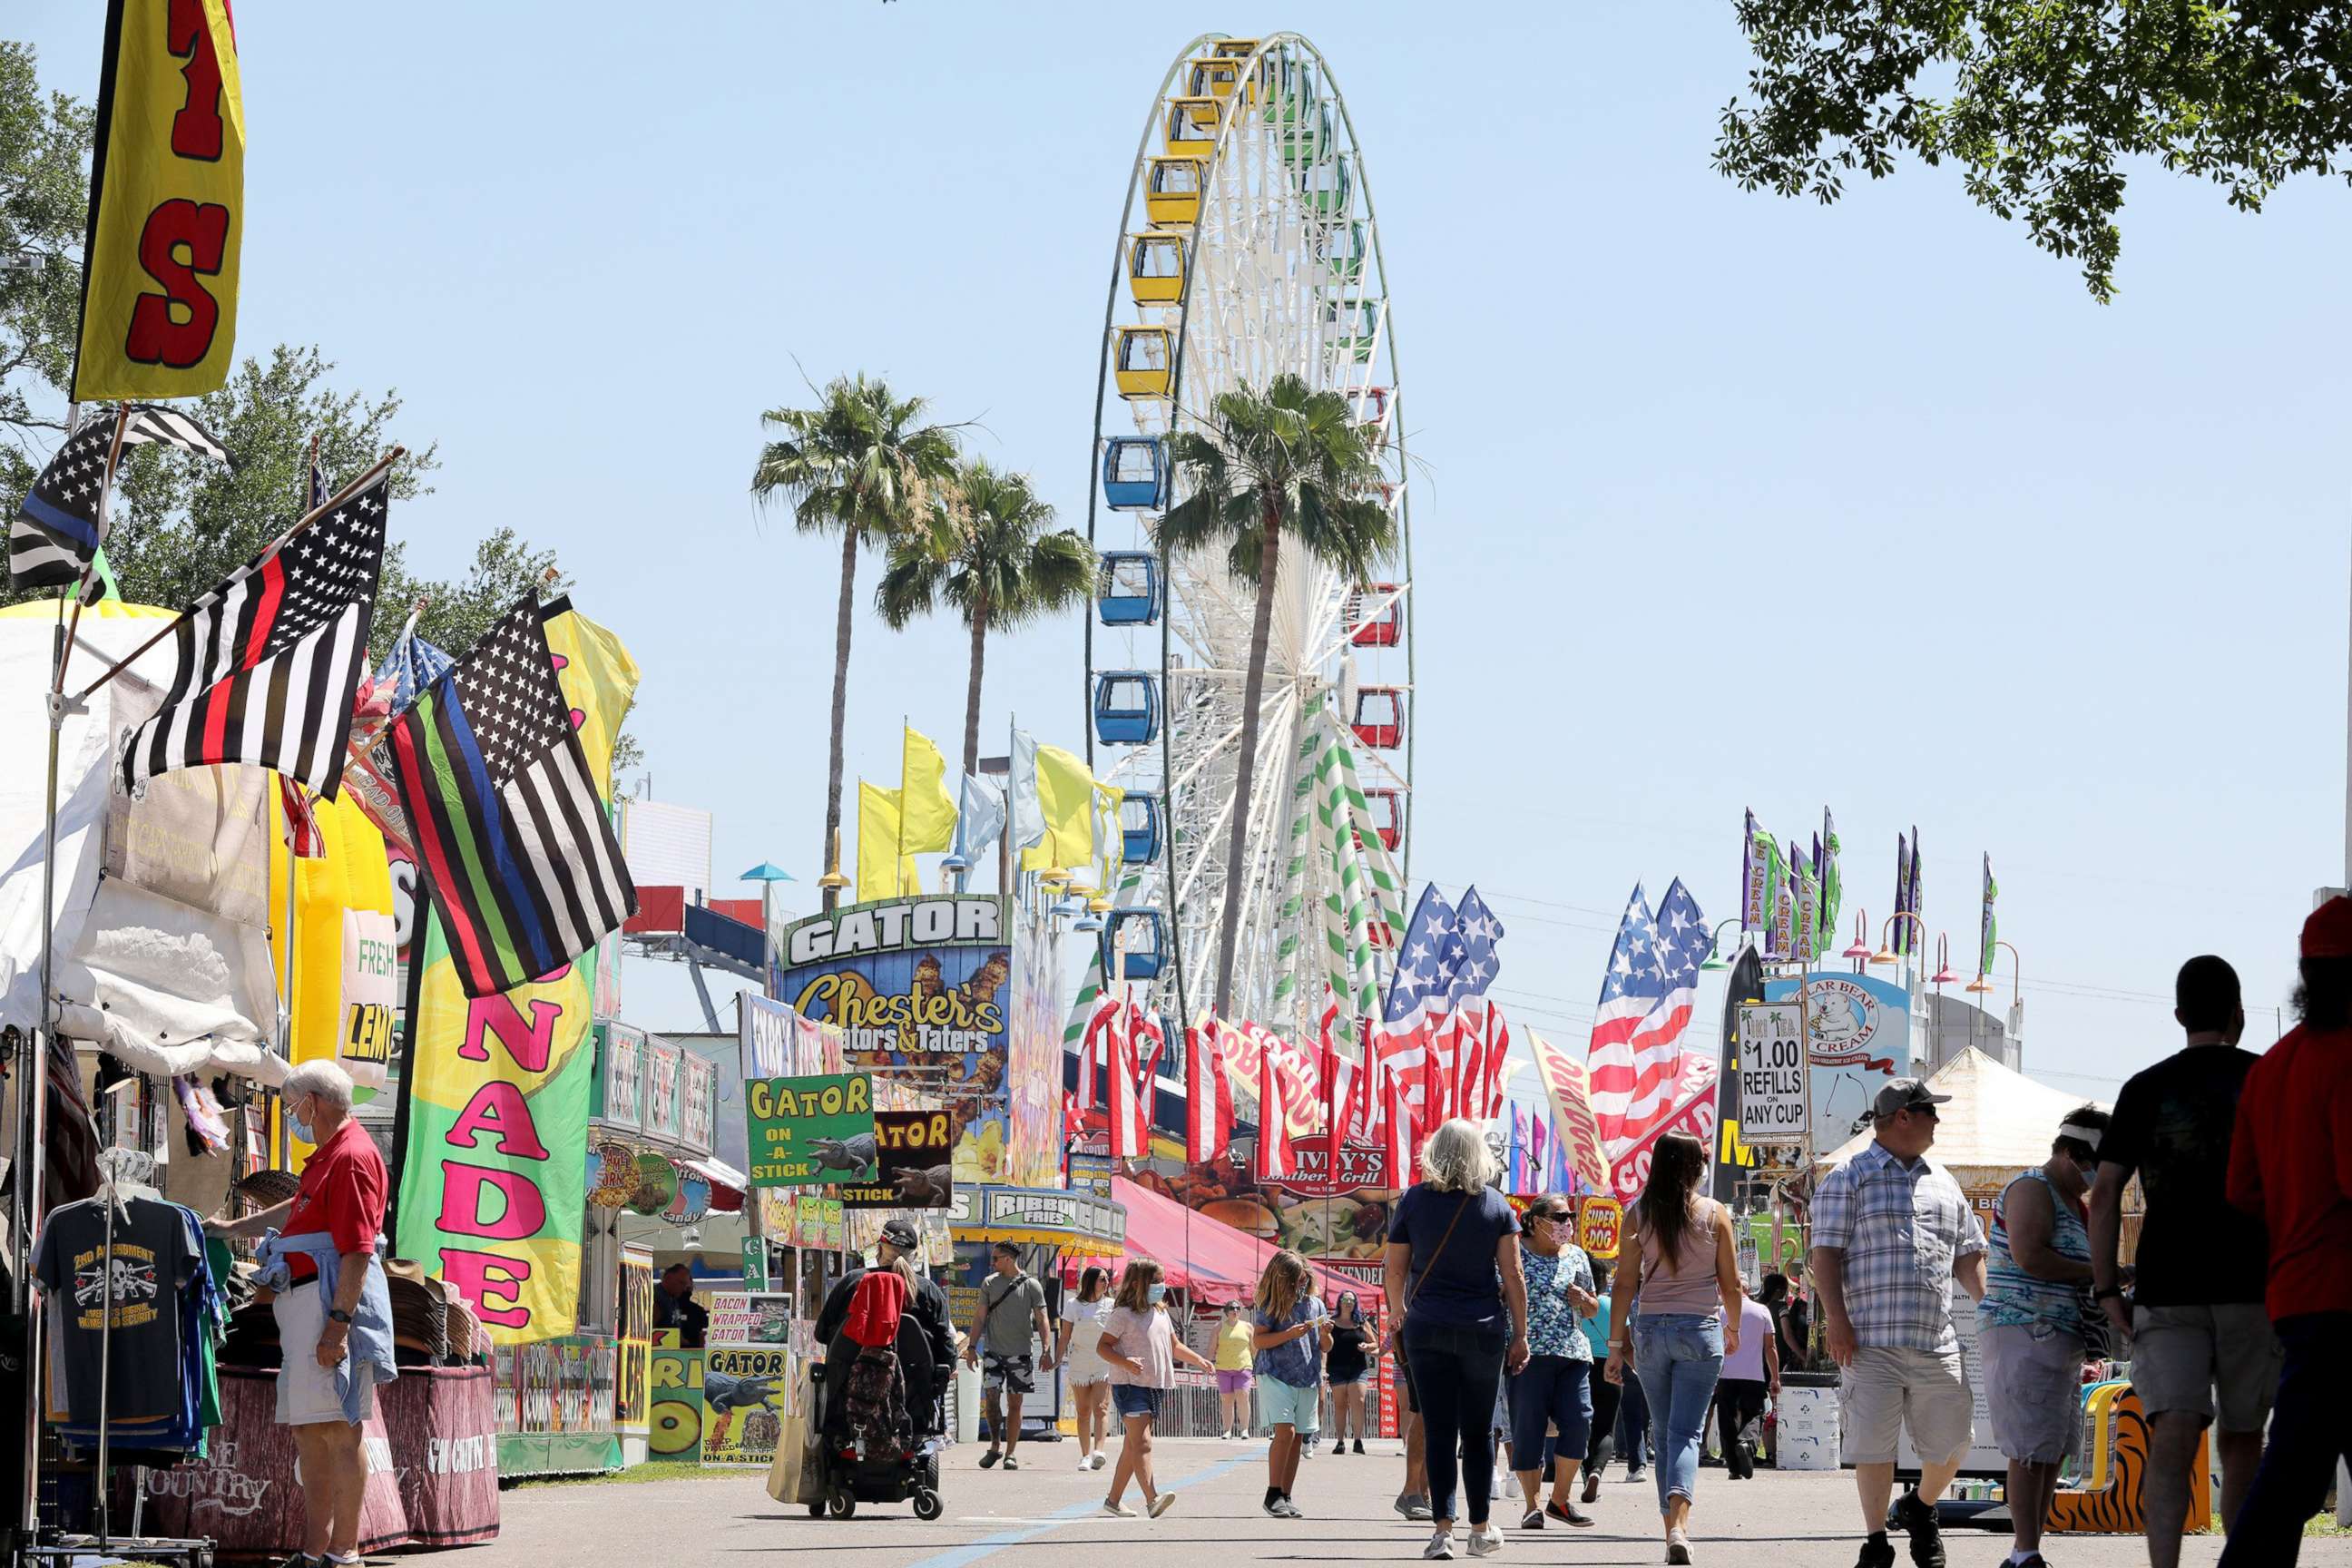 PHOTO: Visitors to the 2021 Florida State Fair tour a row of concessions and venders on opening day, April 22, 2021, at the Florida State Fairgrounds in Tampa, Fla.